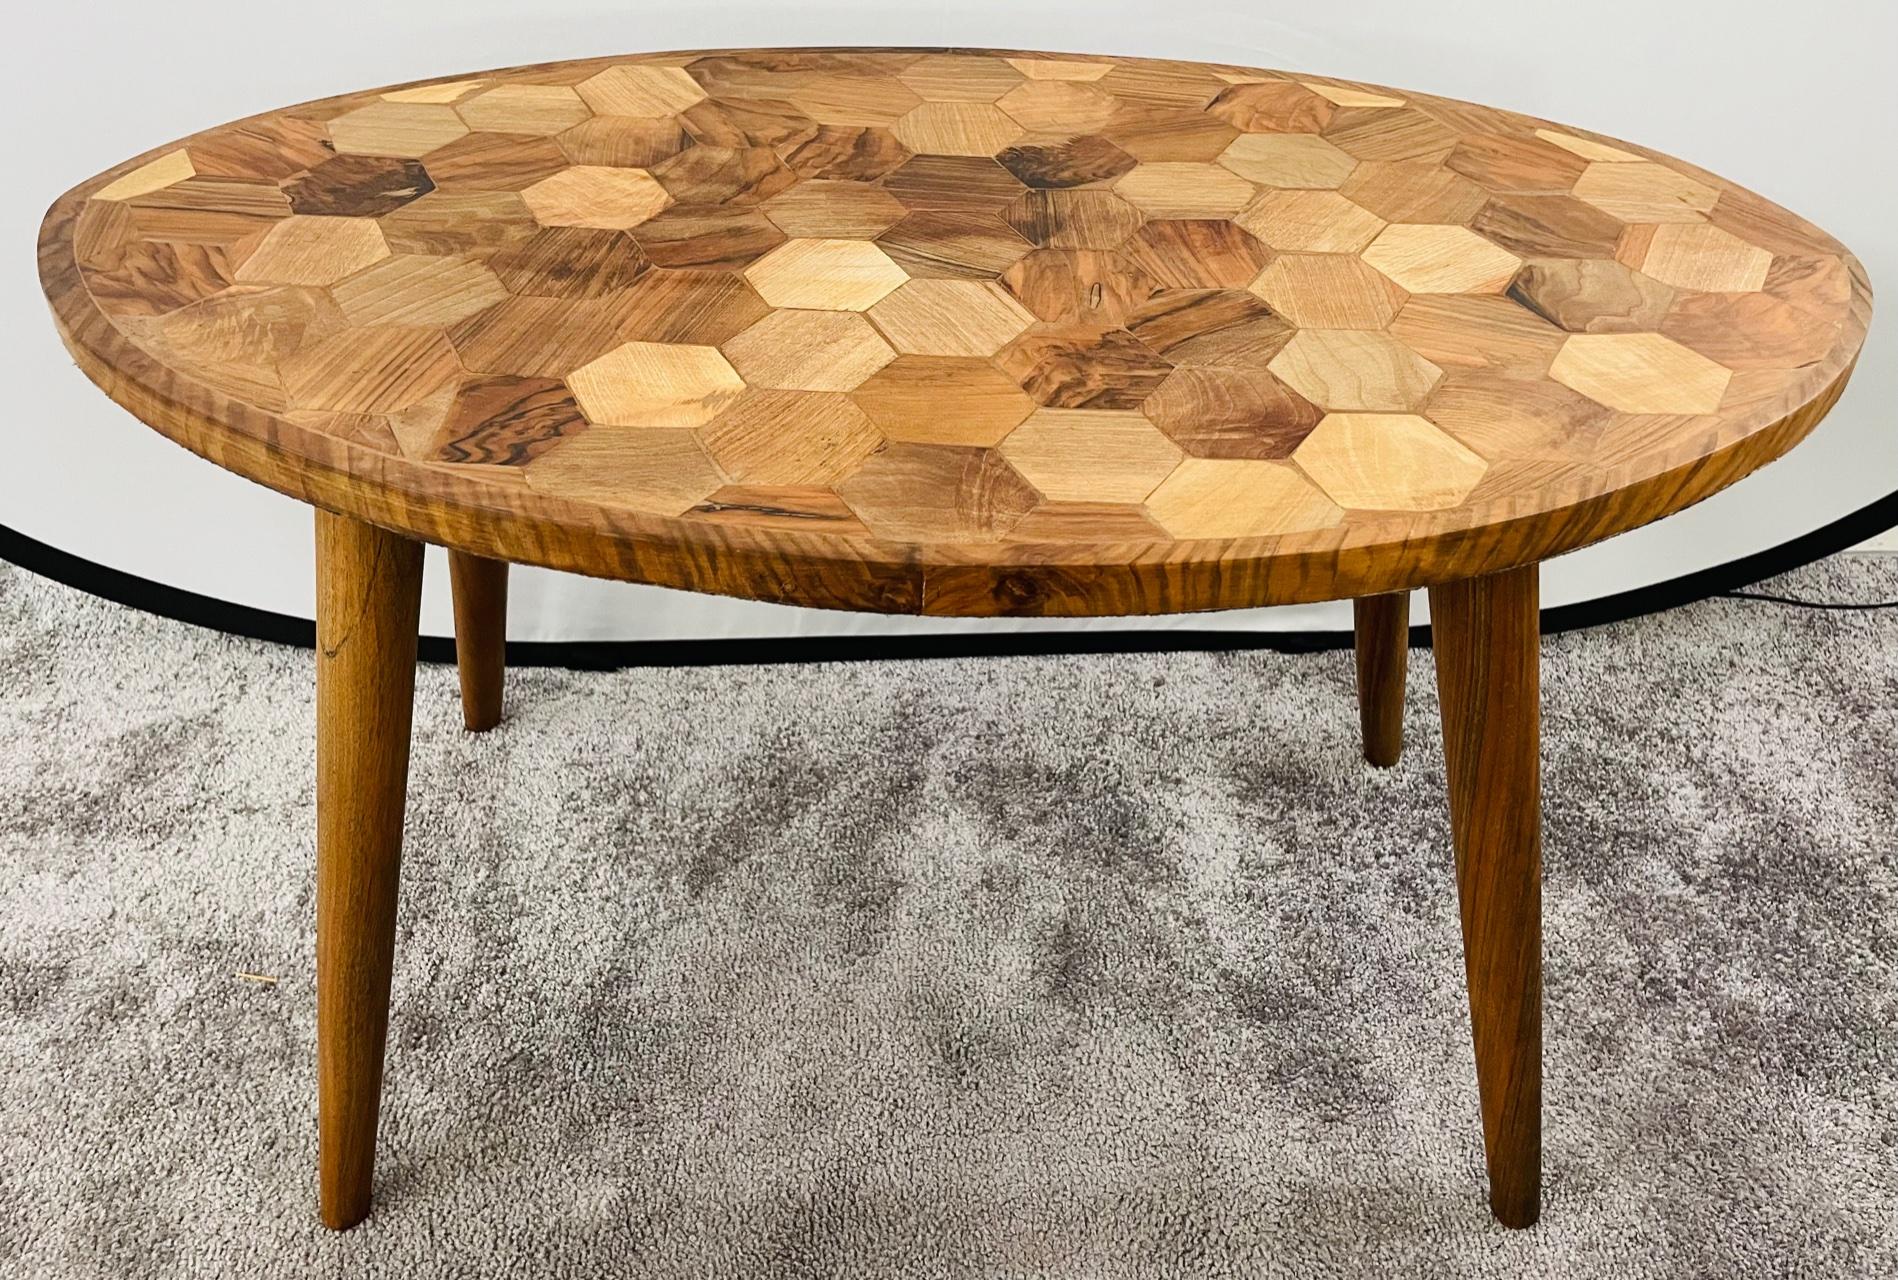 A Mid-Century Modern style coffee table featuring an oval shaped top and an exquisite hexagonal motifs. the table is made of birch wood and is light and easy to move around. The handmade Mid-Century Modern style will add style to any room and